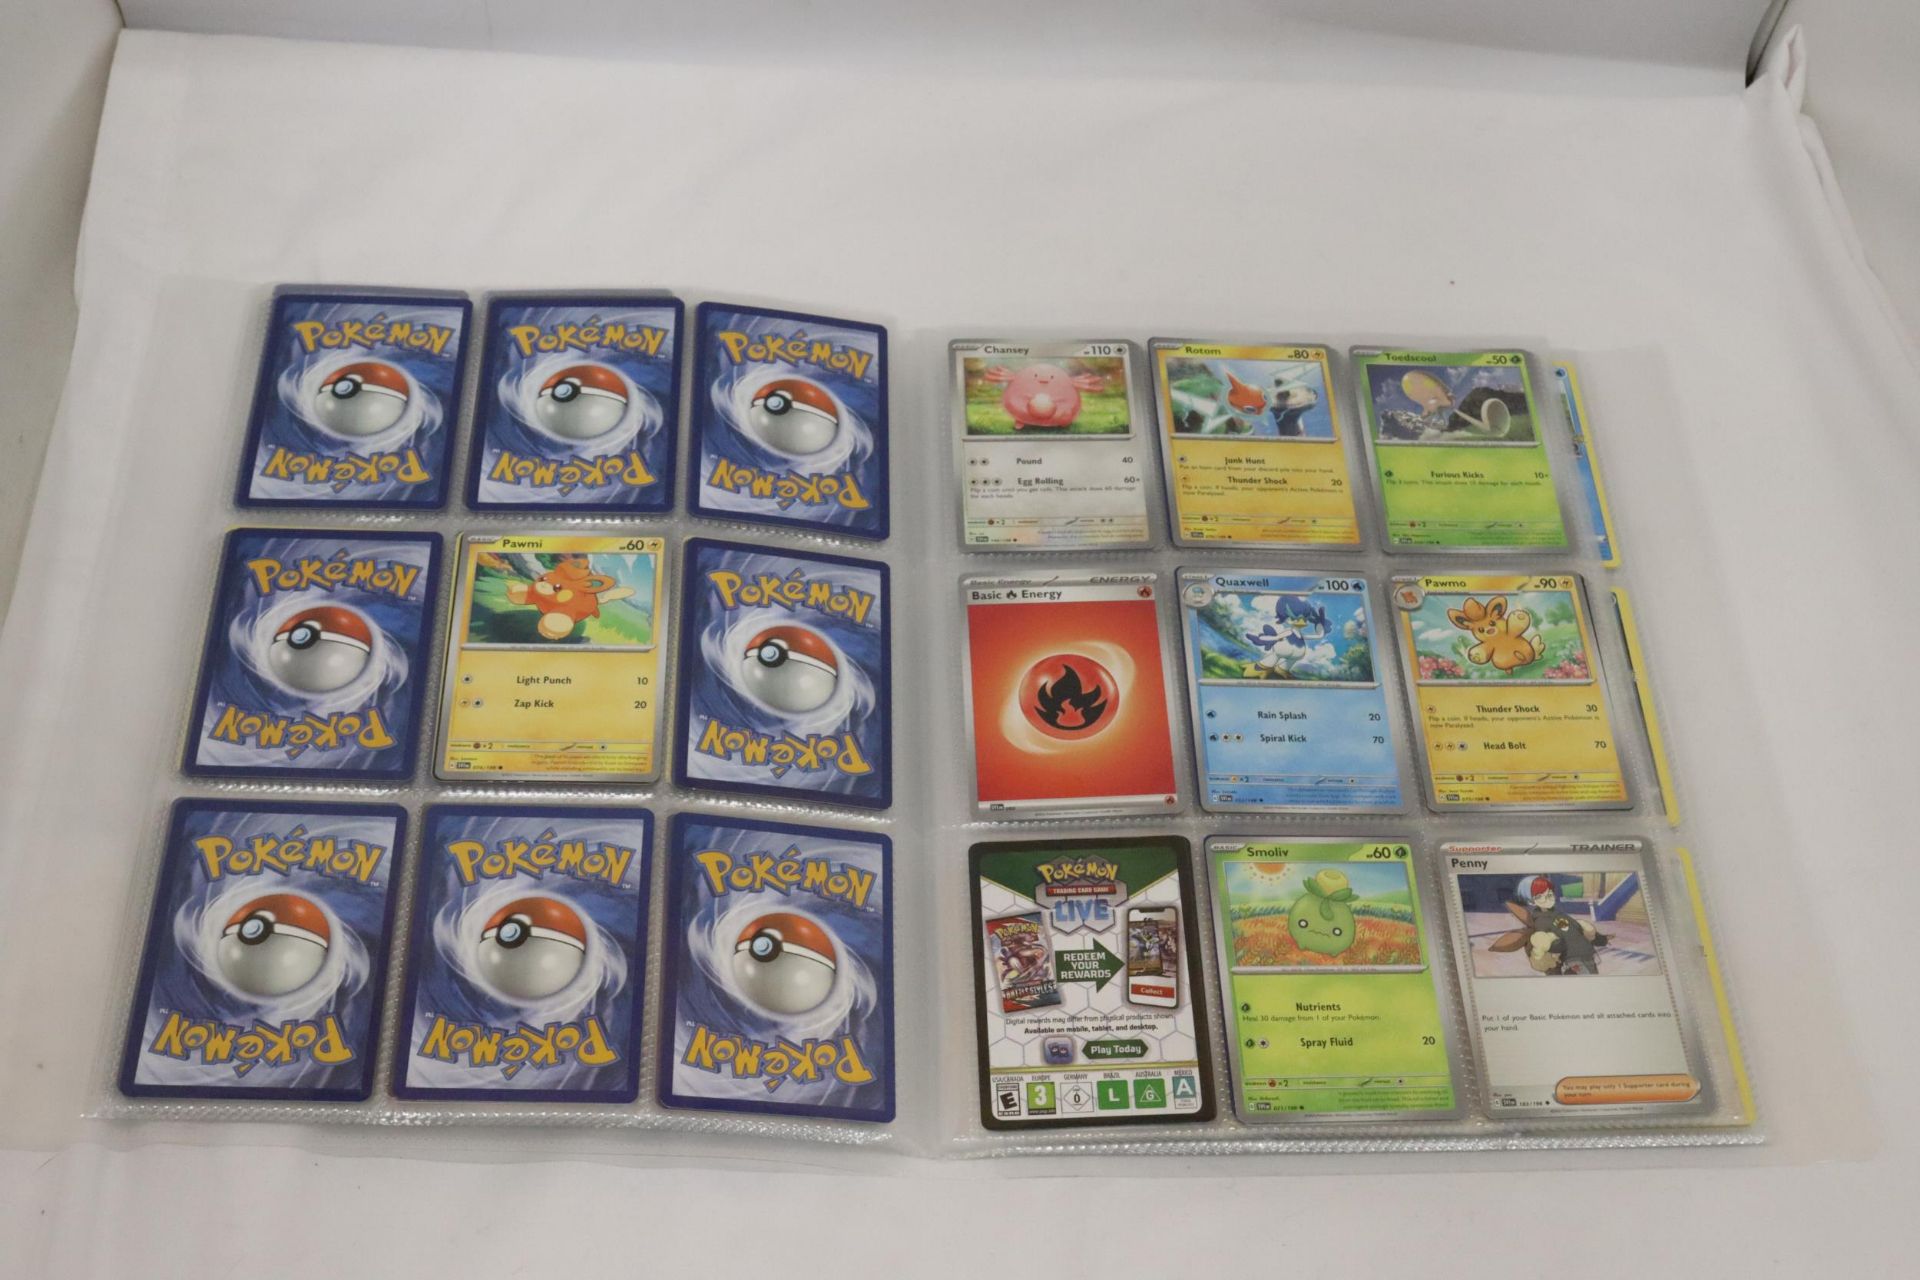 A PROTECTIVE TRADING CARD BINDER FULL OF POKEMON CARDS, INCLUDING SHINIES - Image 2 of 5